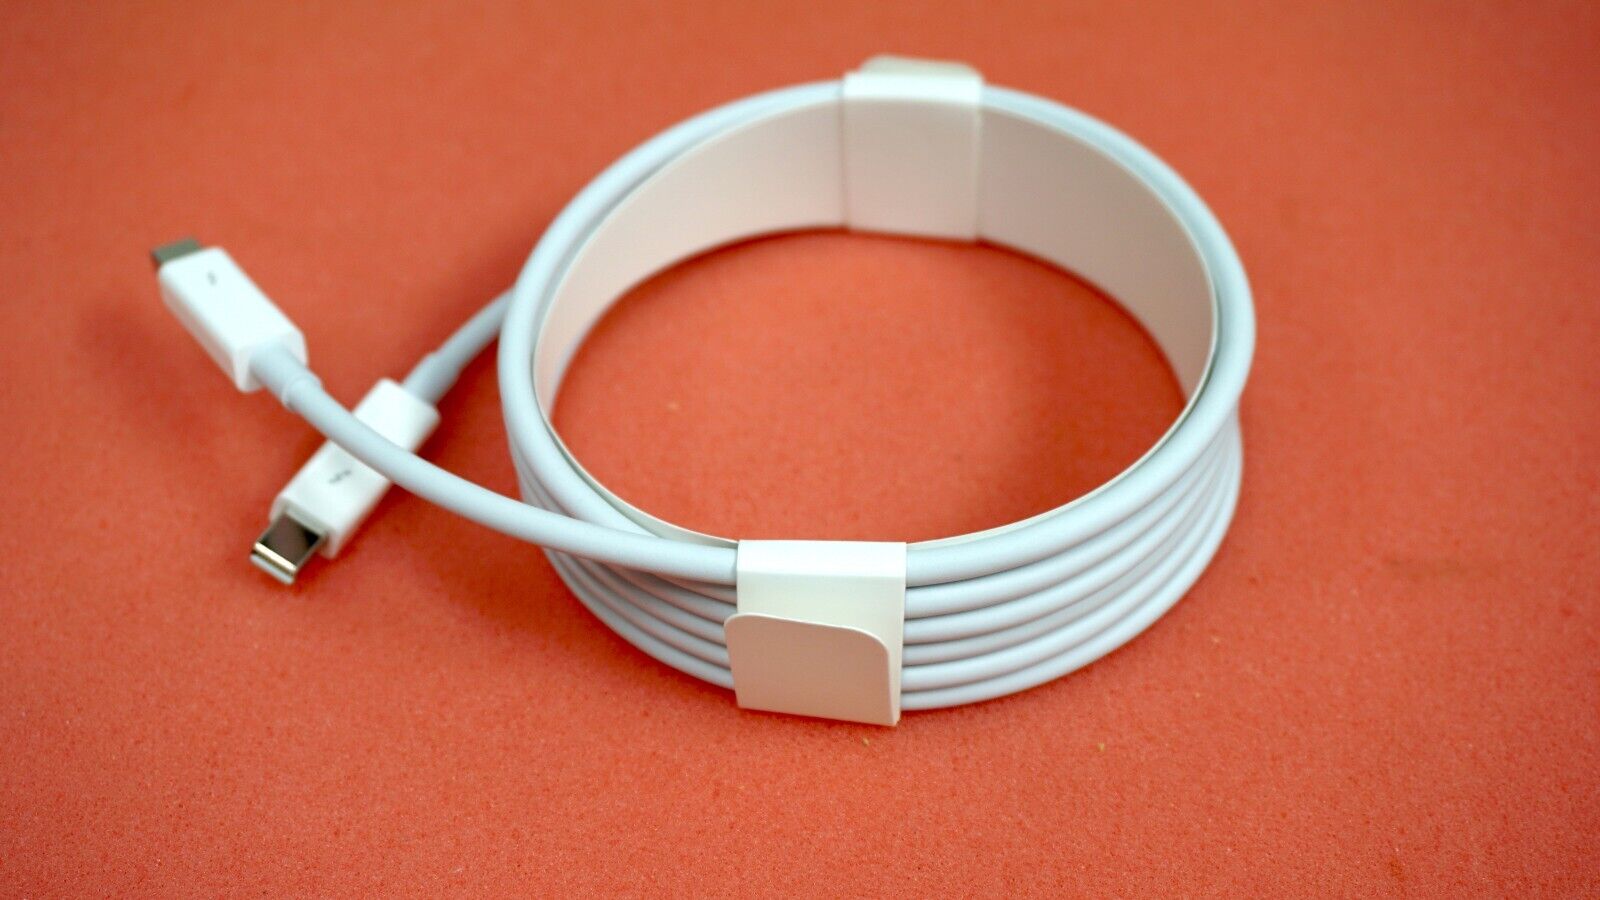 Brand New Genuine Apple 2M / 6FT Thunderbolt Cable A1410 MD861LL/A White (L8